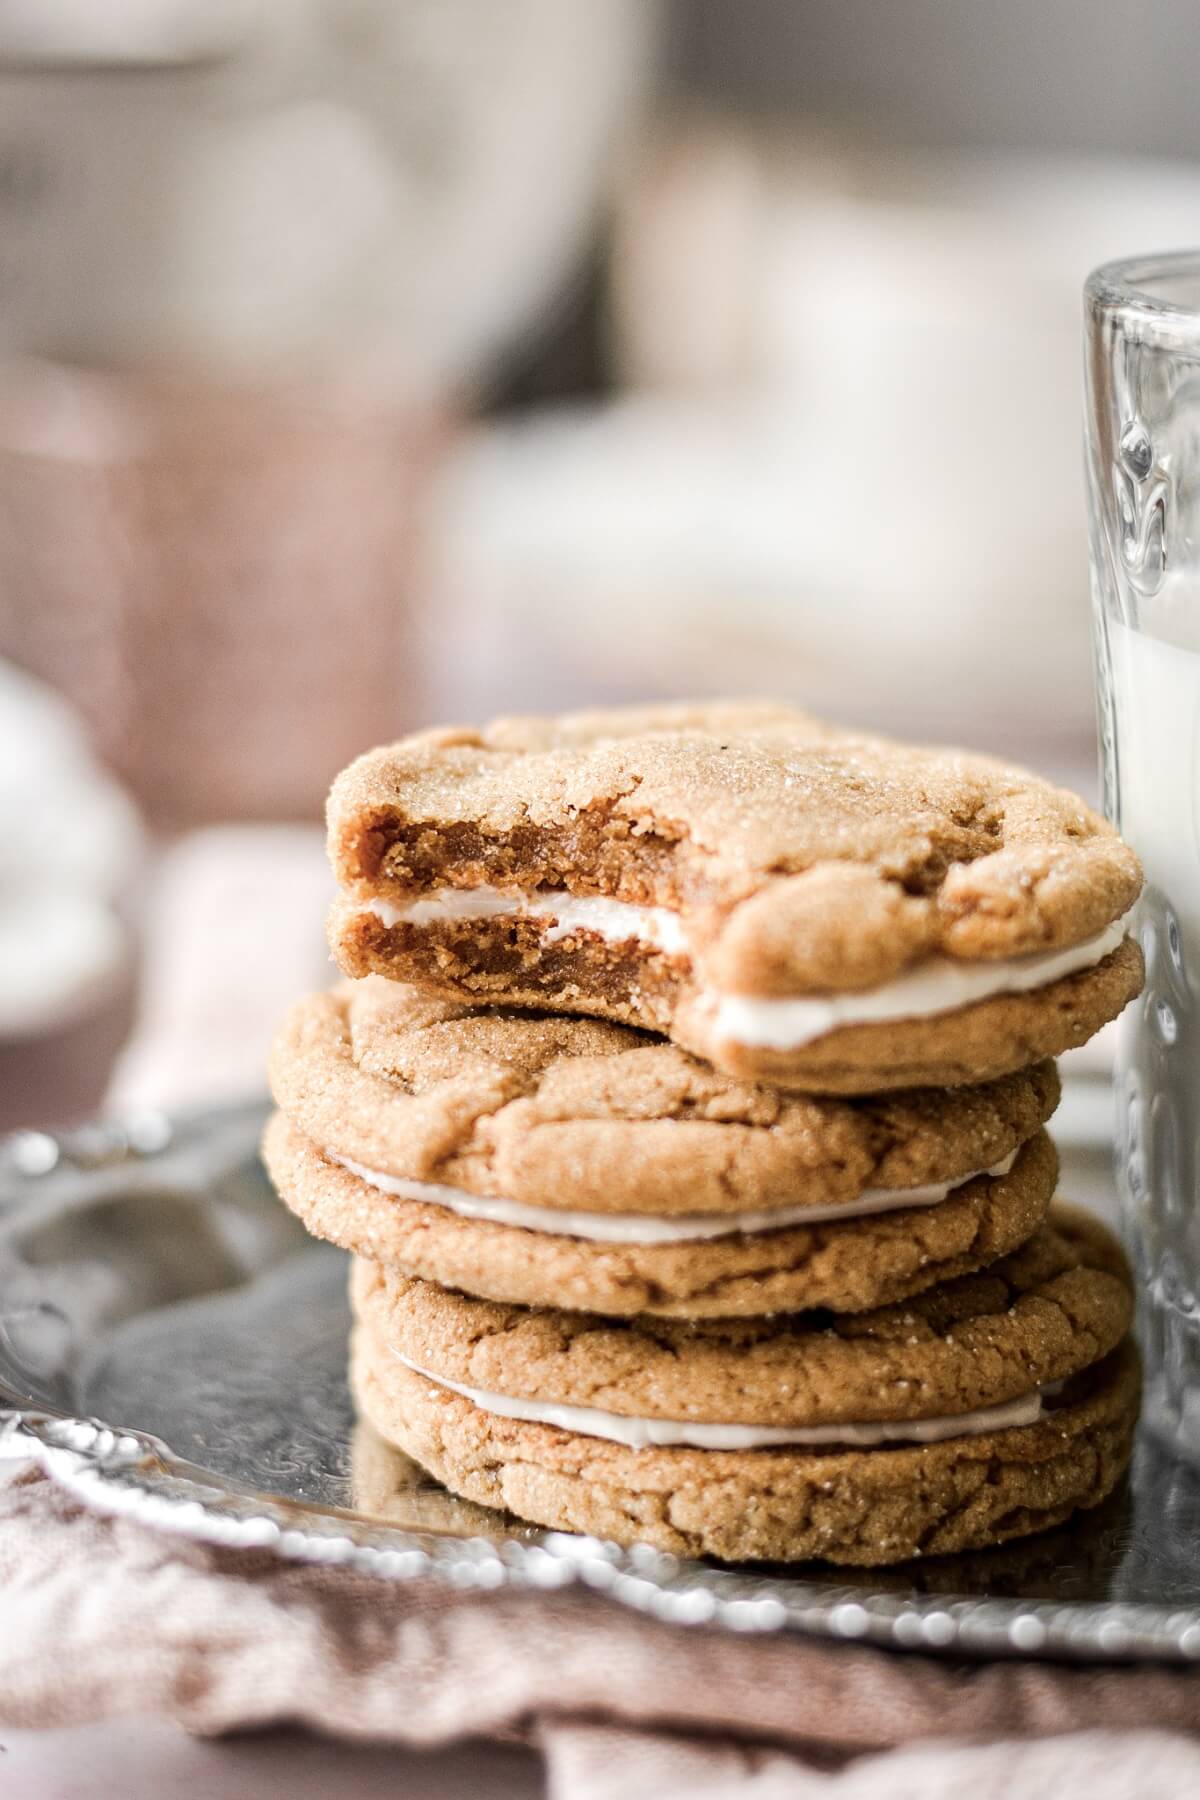 Ginger molasses cookie sandwiches with lemon icing.